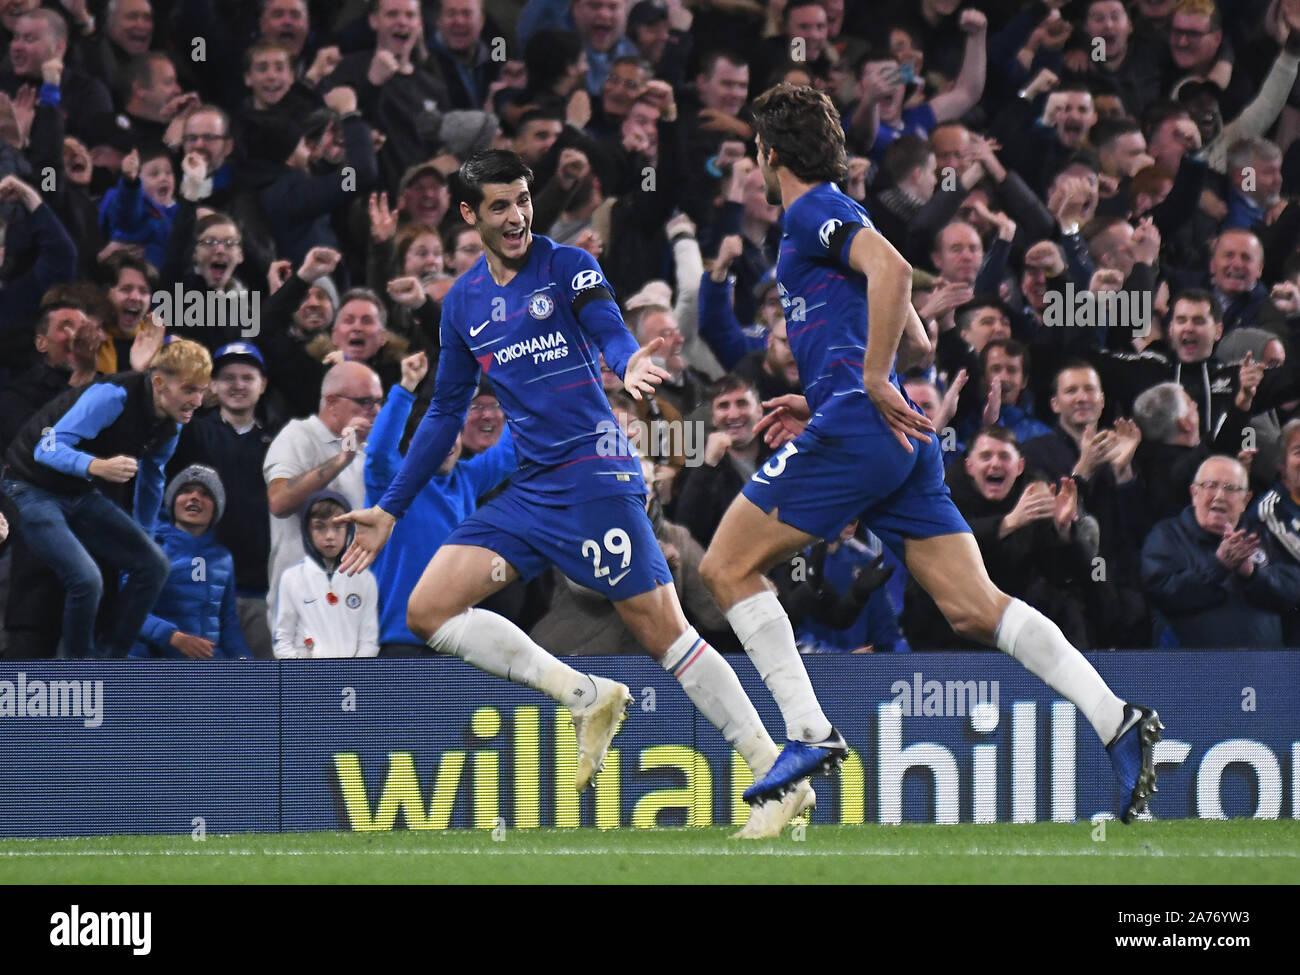 LONDON, ENGLAND - NOVEMBER 4, 2018: Alvaro Morata of Chelsea (L) celebrates with Marcos Alonso of Chelsea after he scored a goal during the 2018/19 Premier League game between Chelsea FC and Crystal Palace FC at Stamford Bridge. Stock Photo